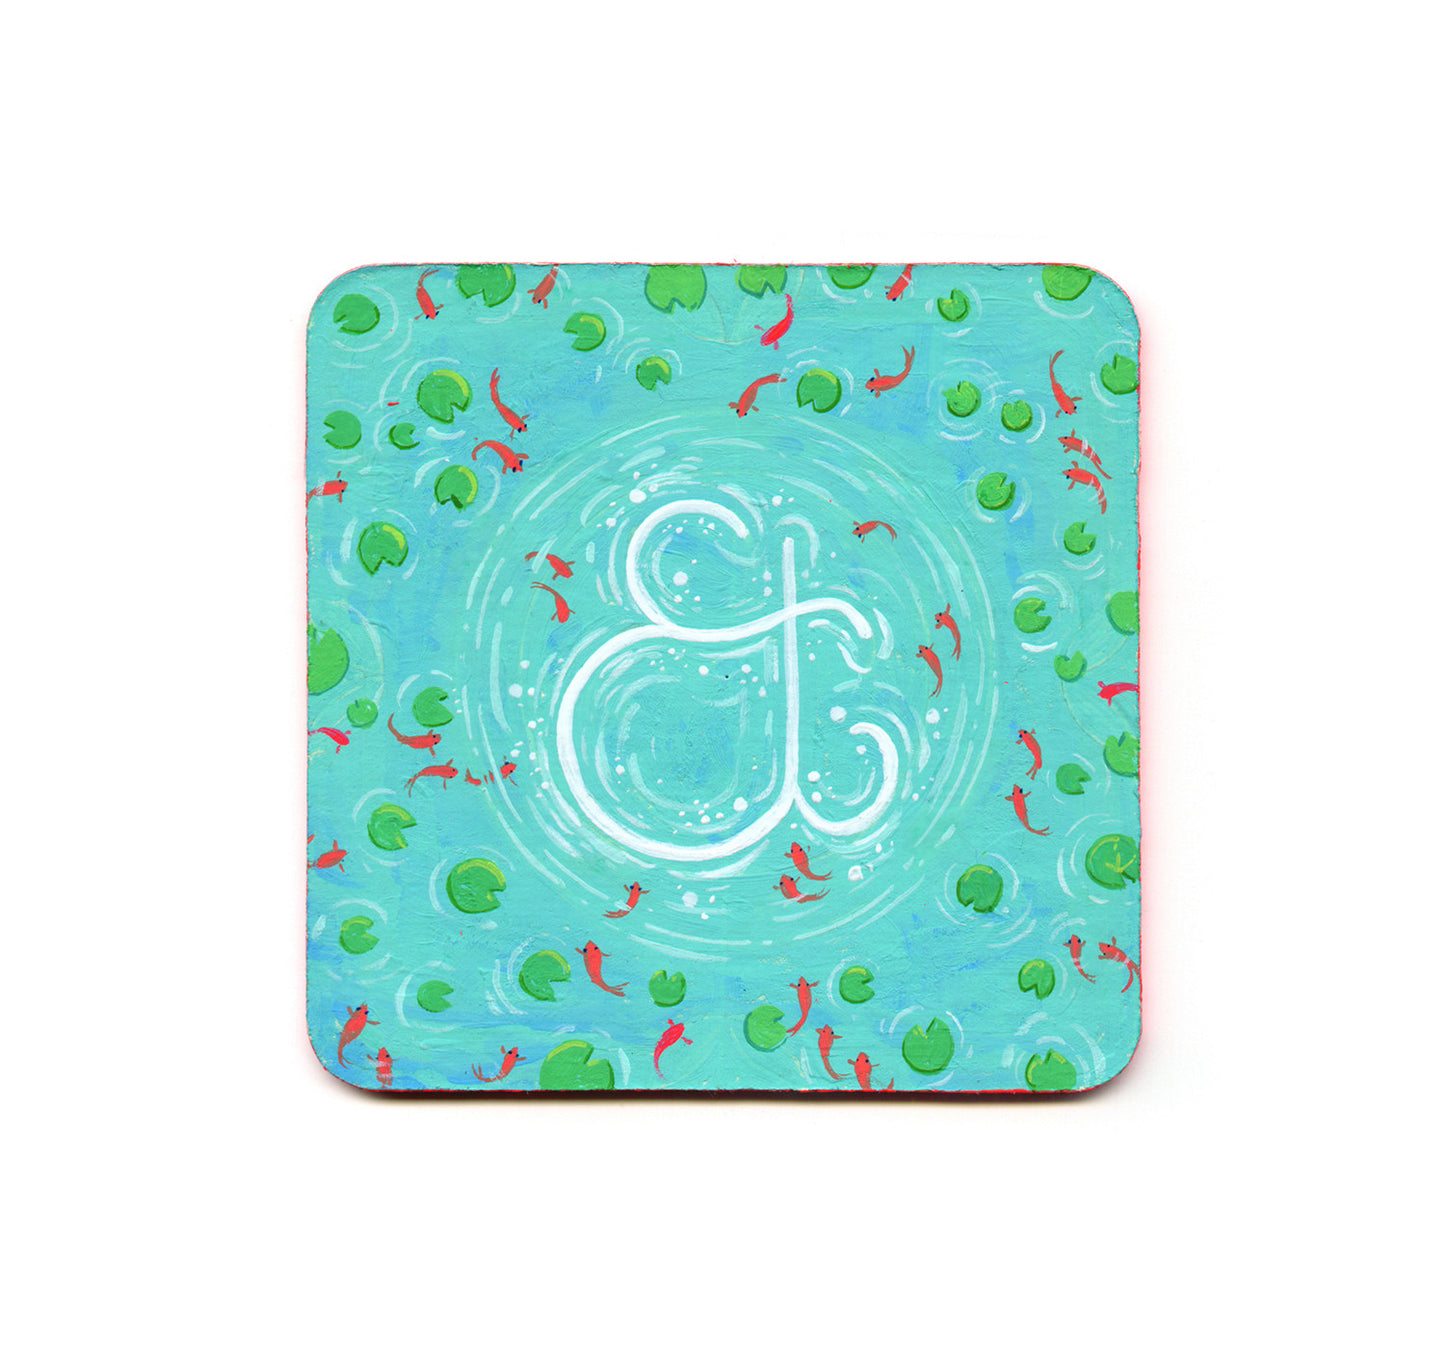 S1 Xian Qing Chen - Ampersand in a Pond Coaster